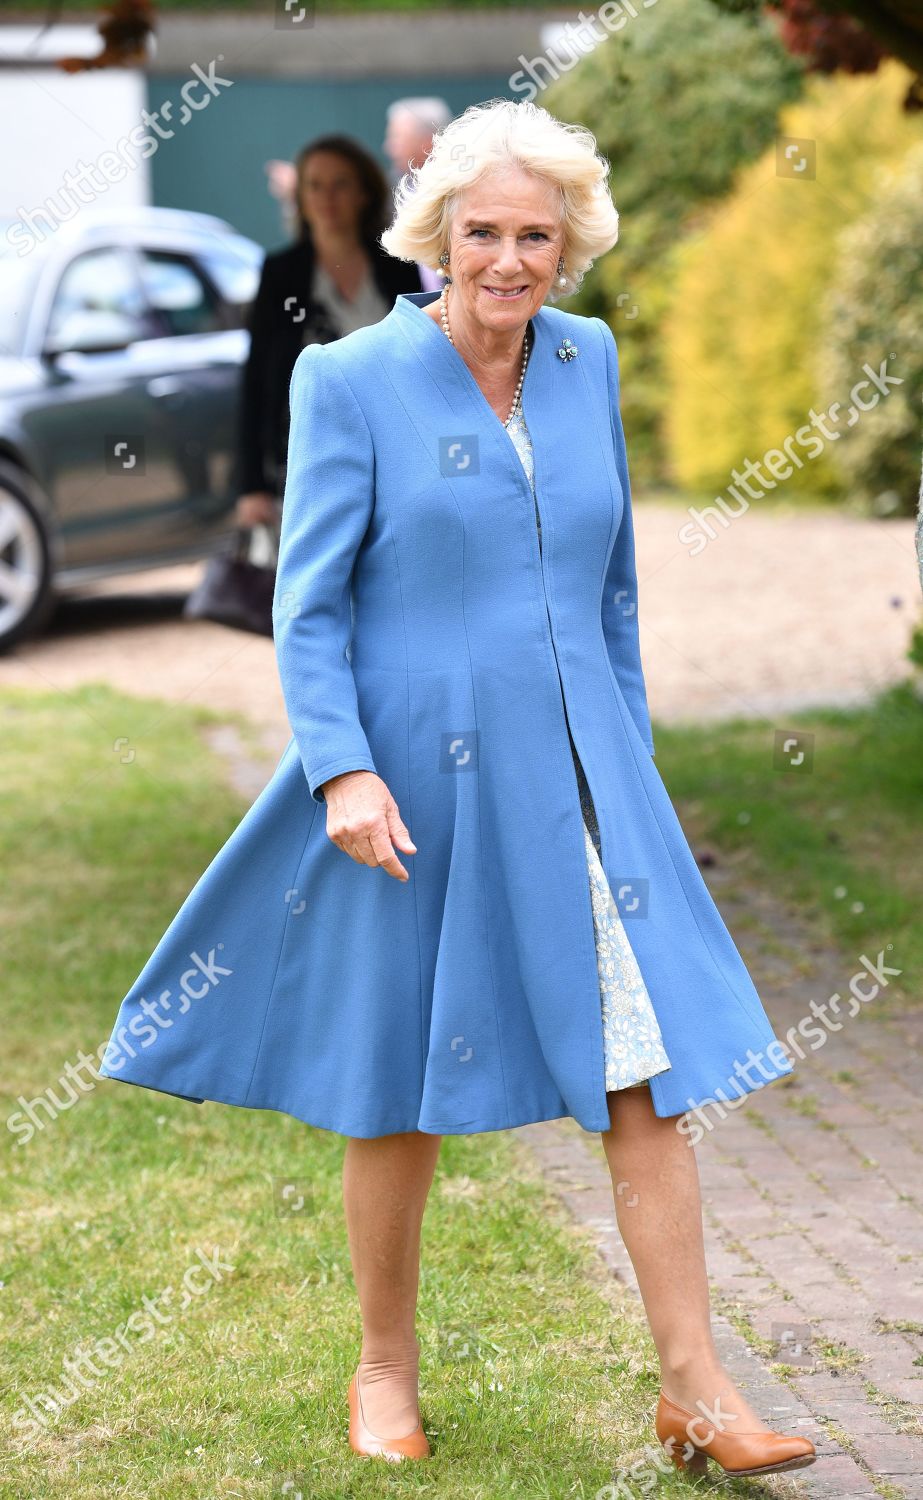 camilla-duchess-of-cornwall-visits-east-sussex-uk-shutterstock-editorial-10238528i.jpg